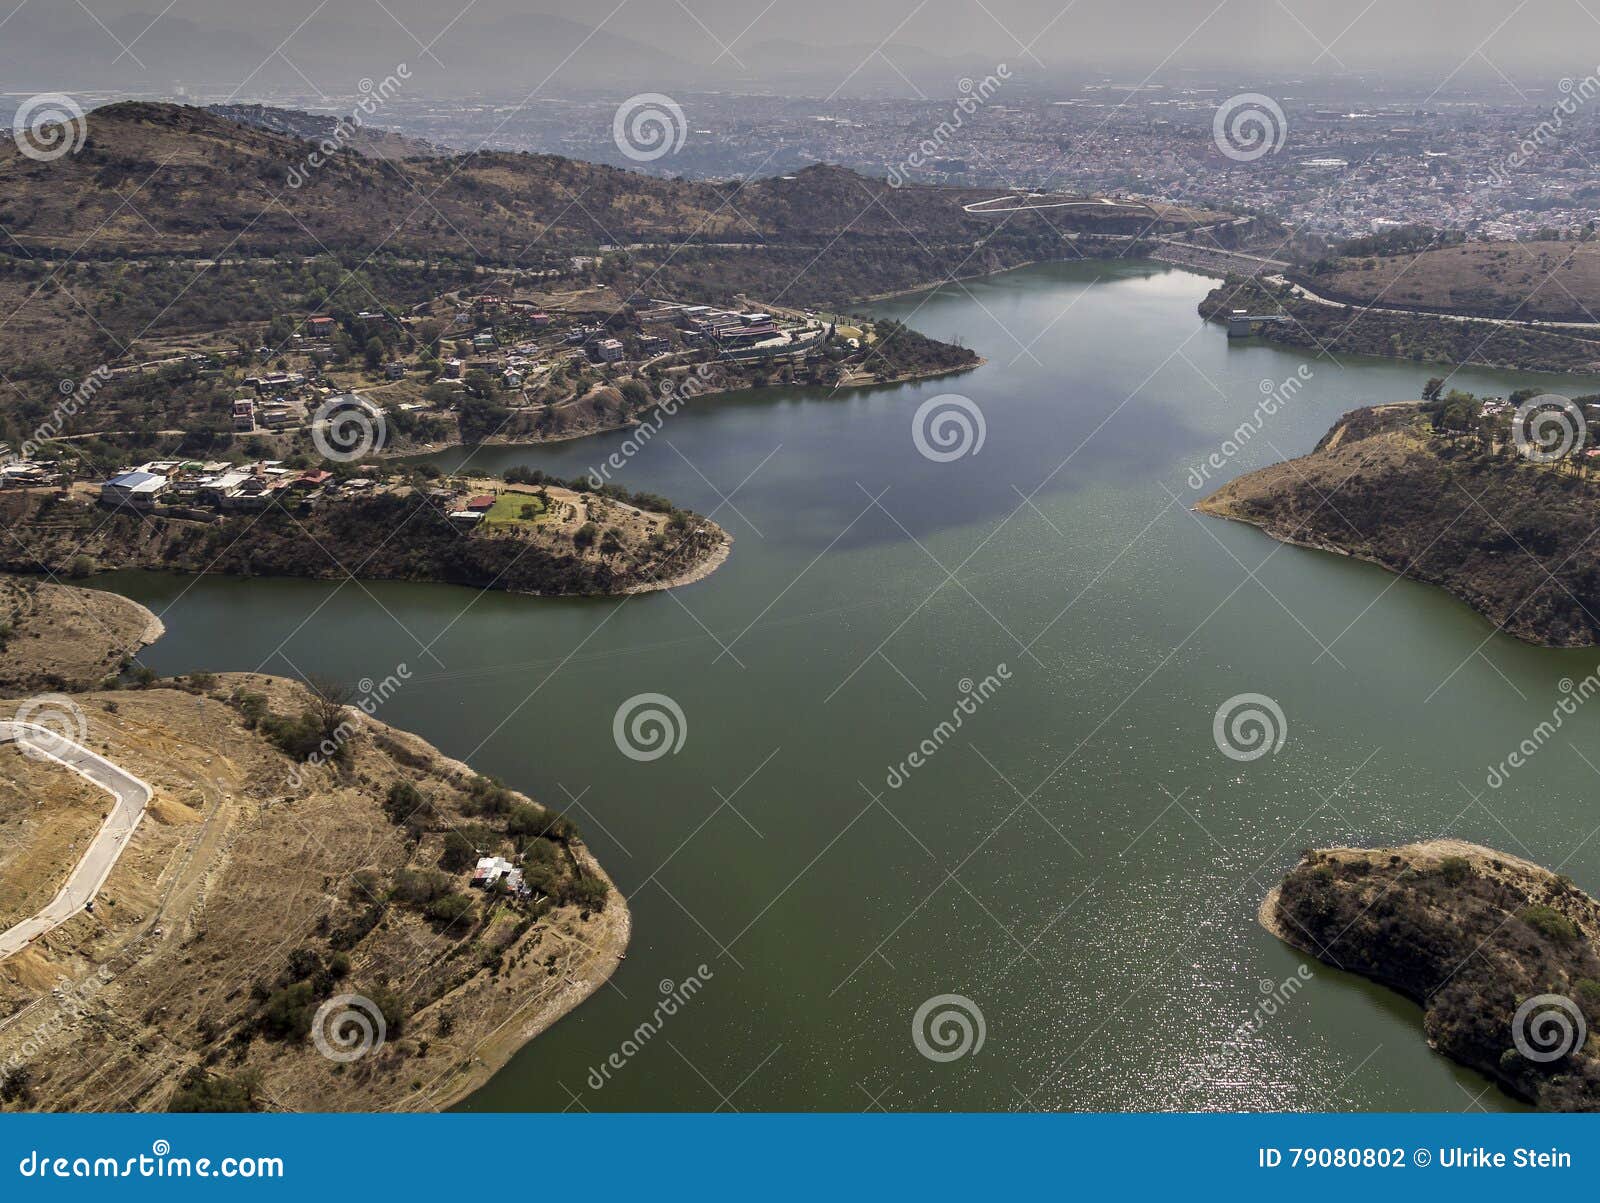 aerial view of mexican presa madin